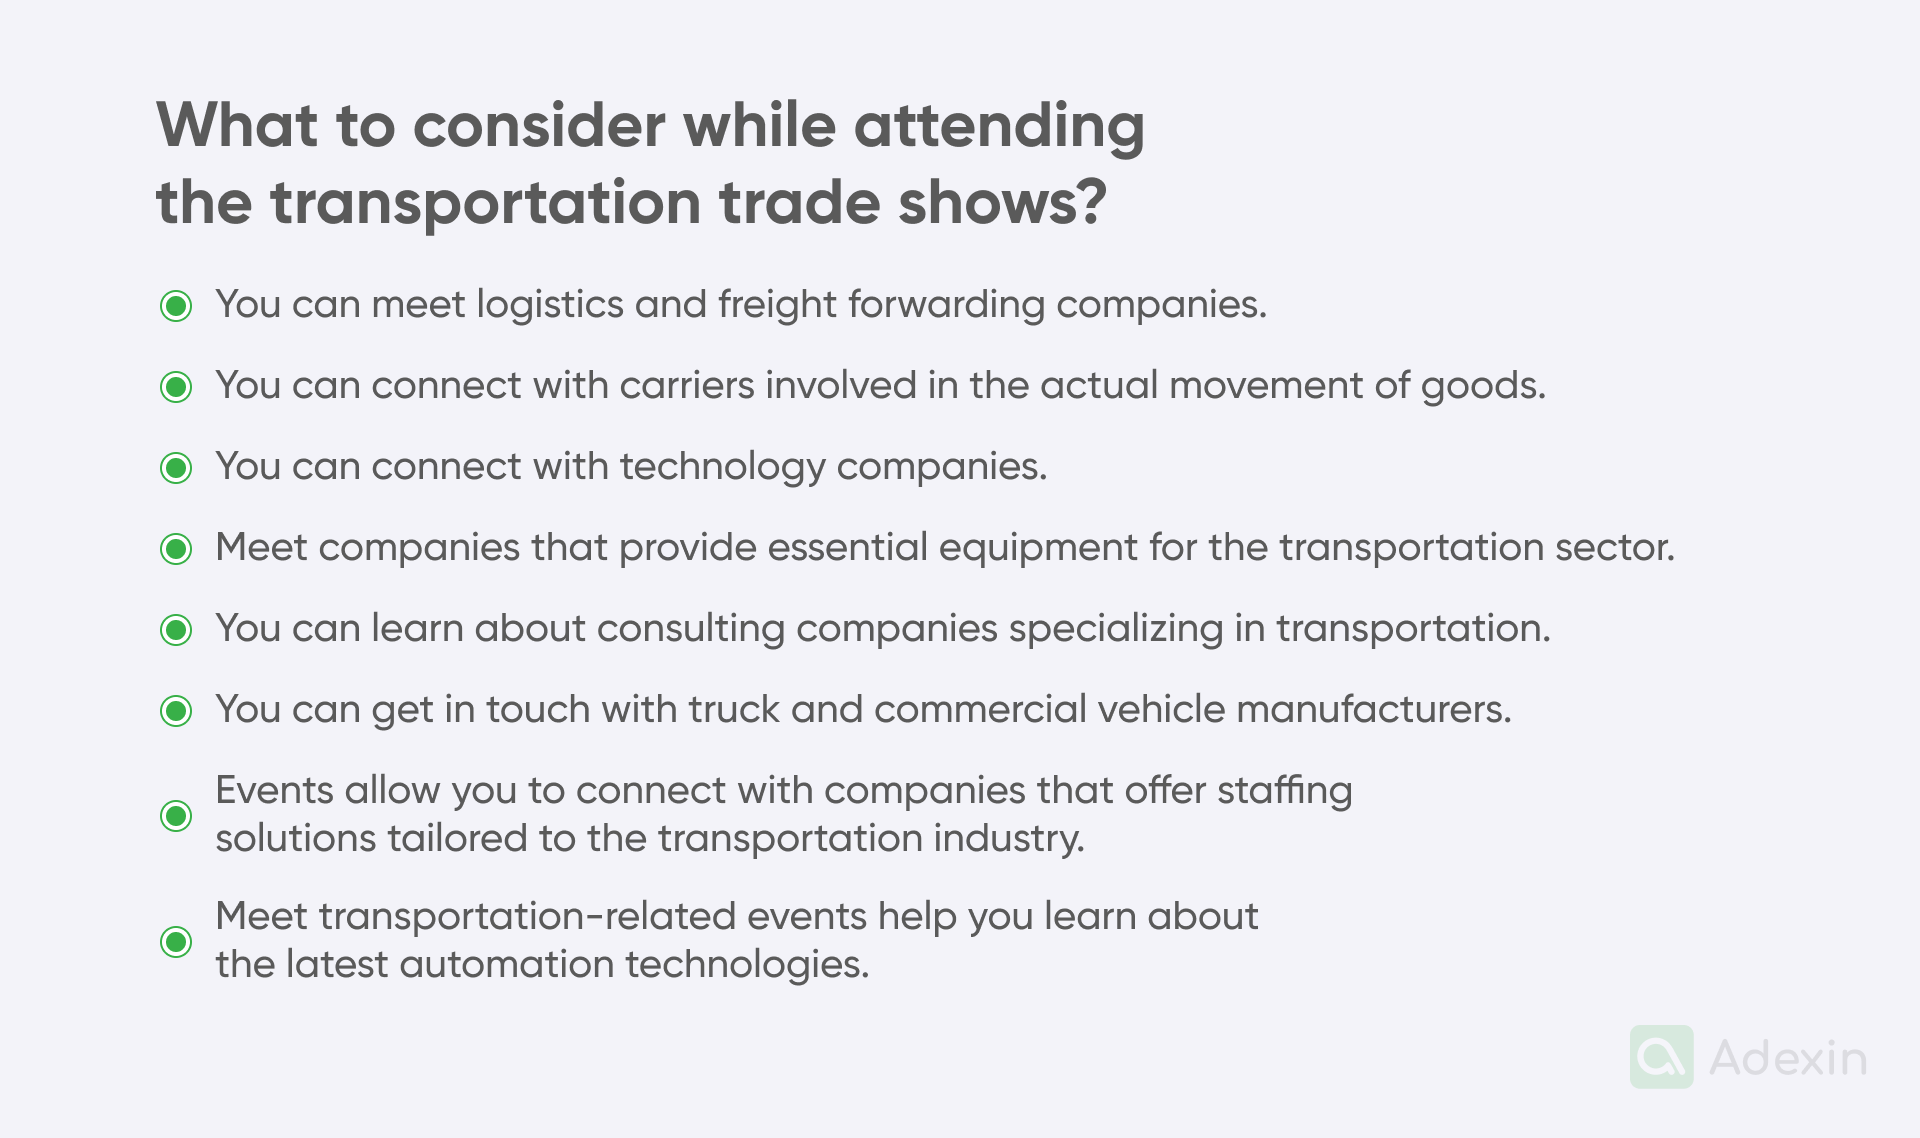 Factors to think about when going to transportation trade shows